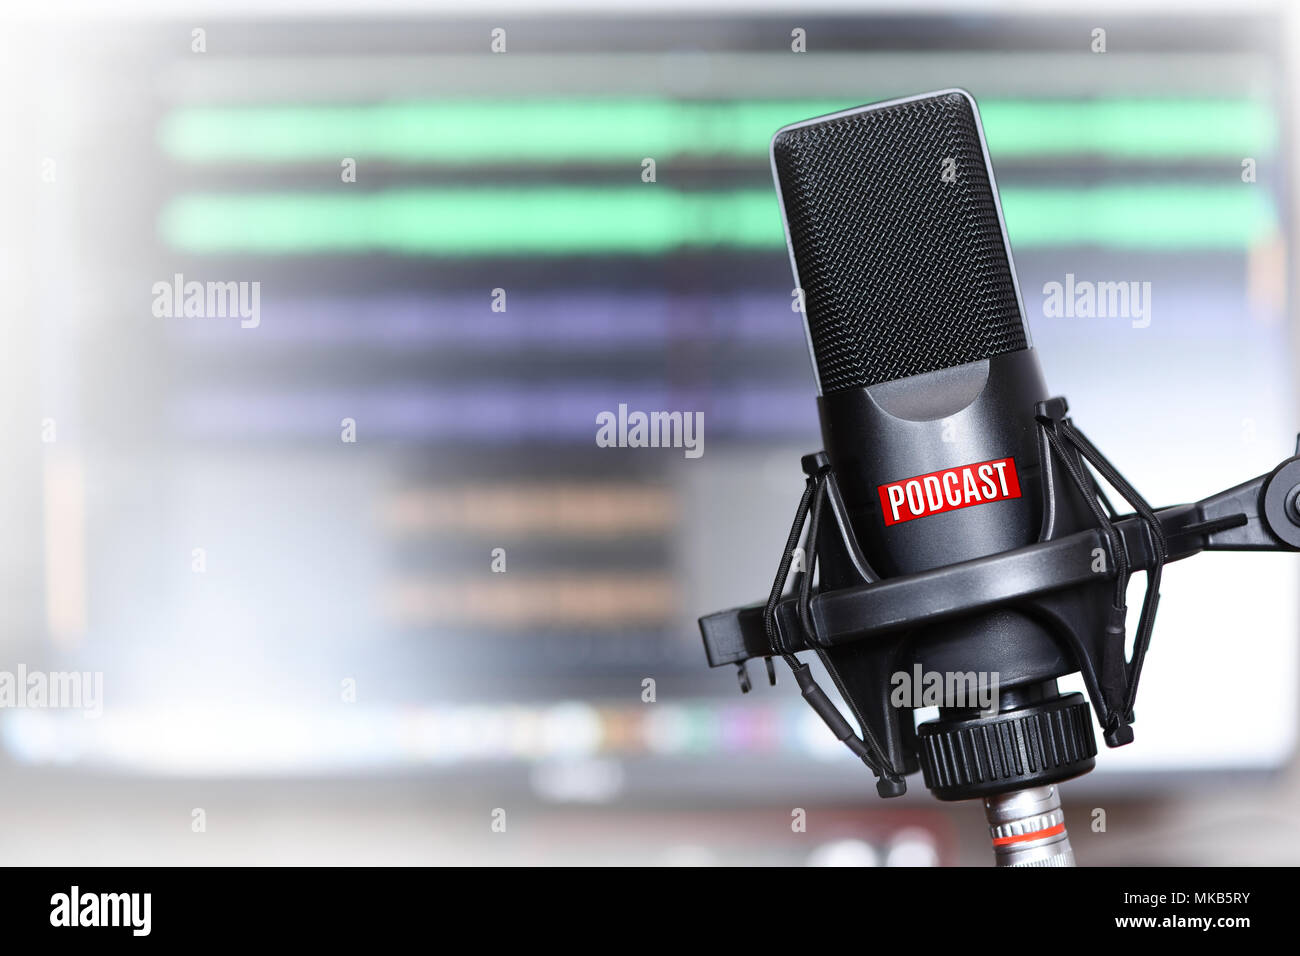 studio microphone with a podcast icon close up Stock Photo